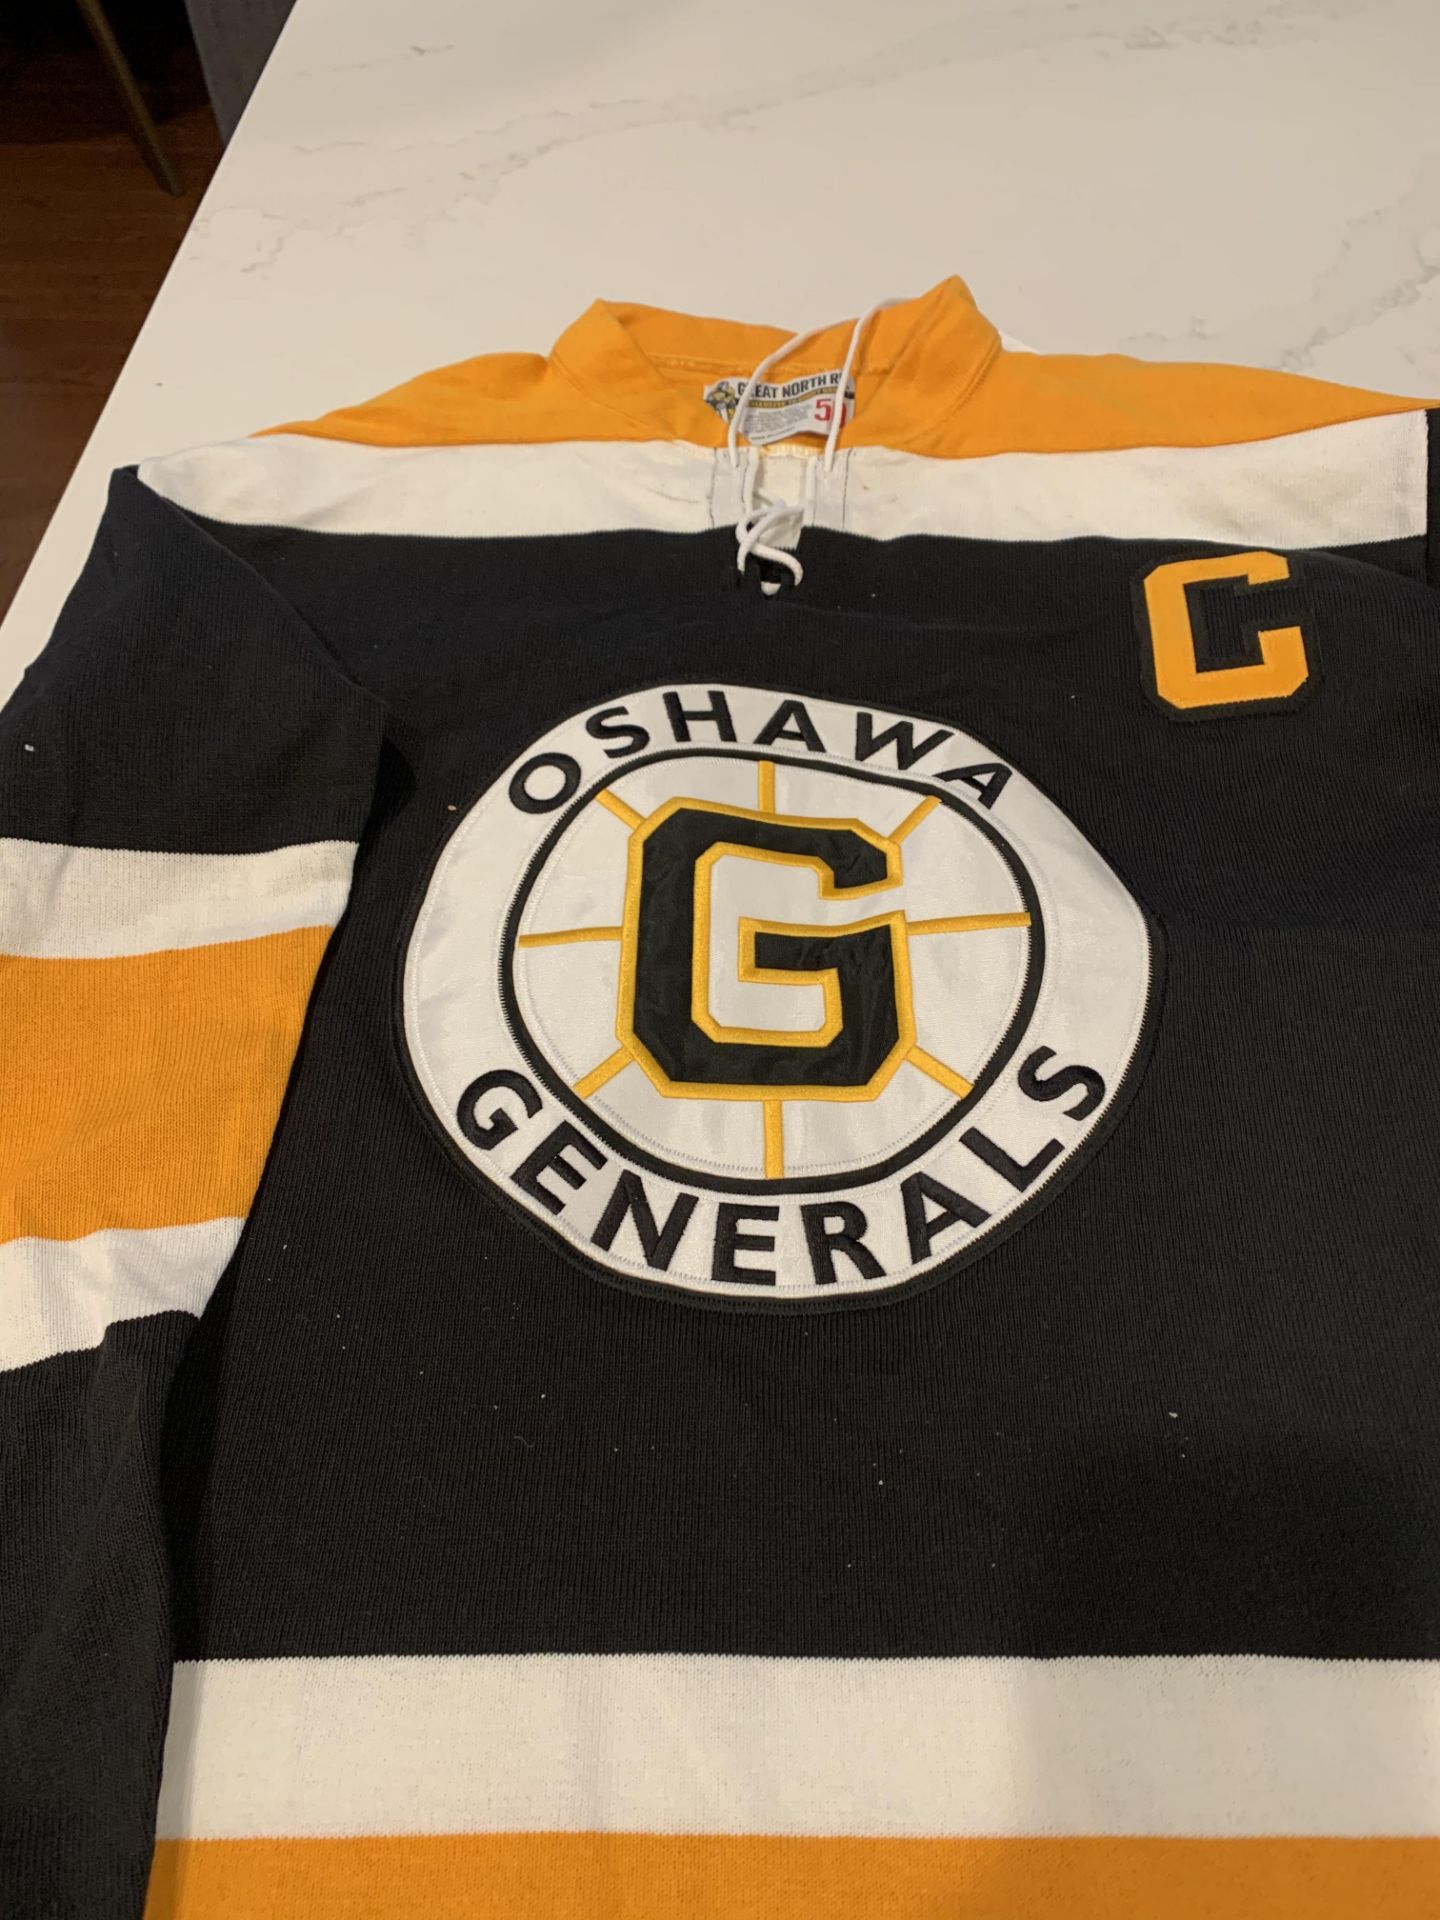 Bobby Orr Autographed Oshawa Generals Captains Jersey (Junior League) Not Game Worn. Has COA Tag. - Image 3 of 6